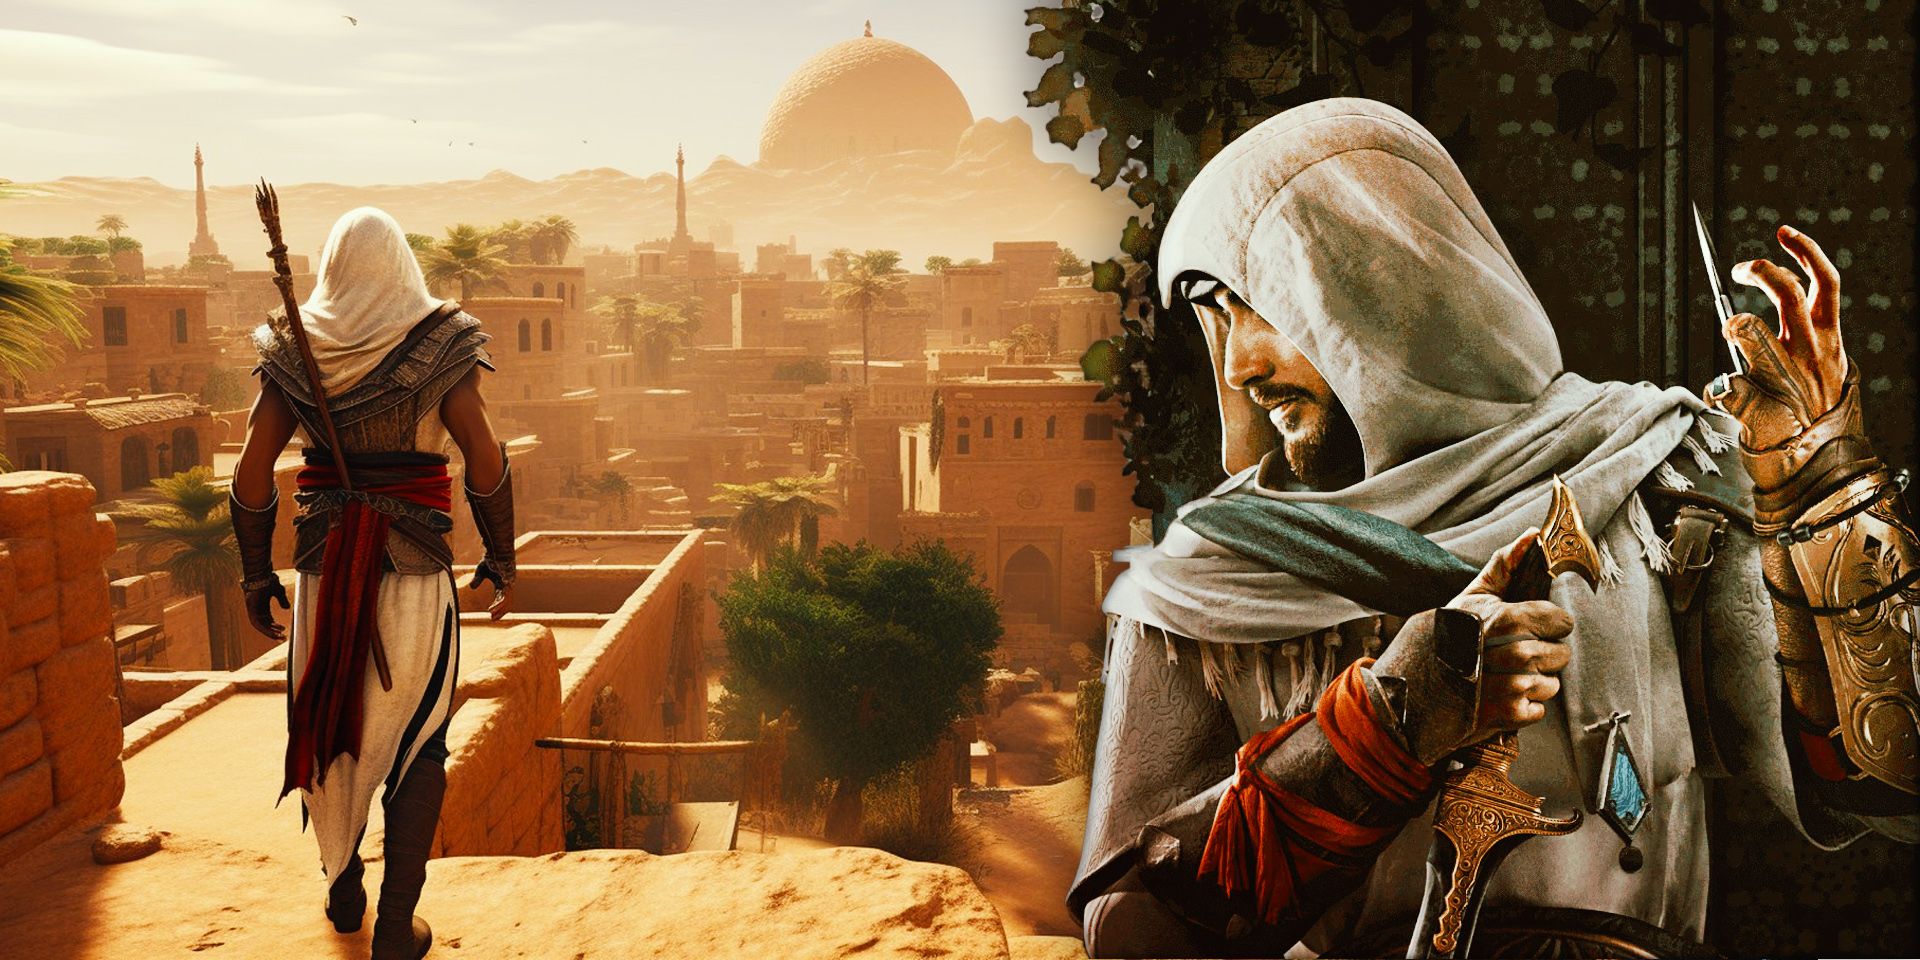 Assassin's Creed Valhalla ending explained: How to get the good